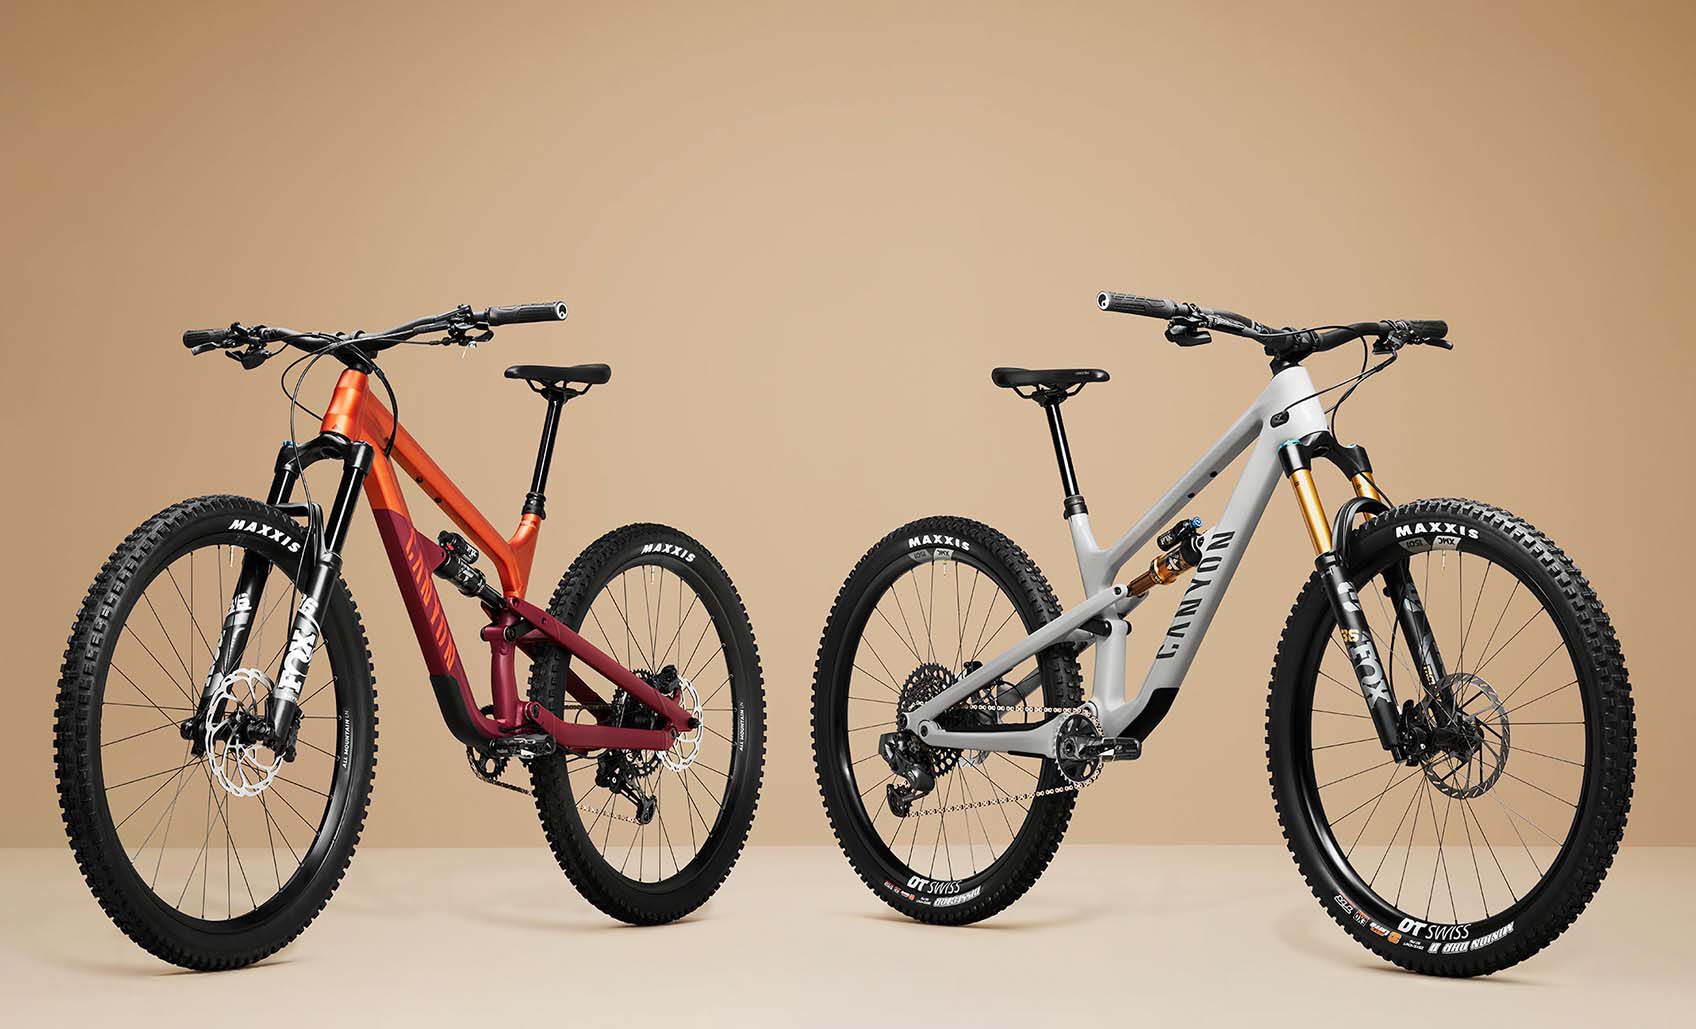 Canyon Spectral 125 | CANYON US